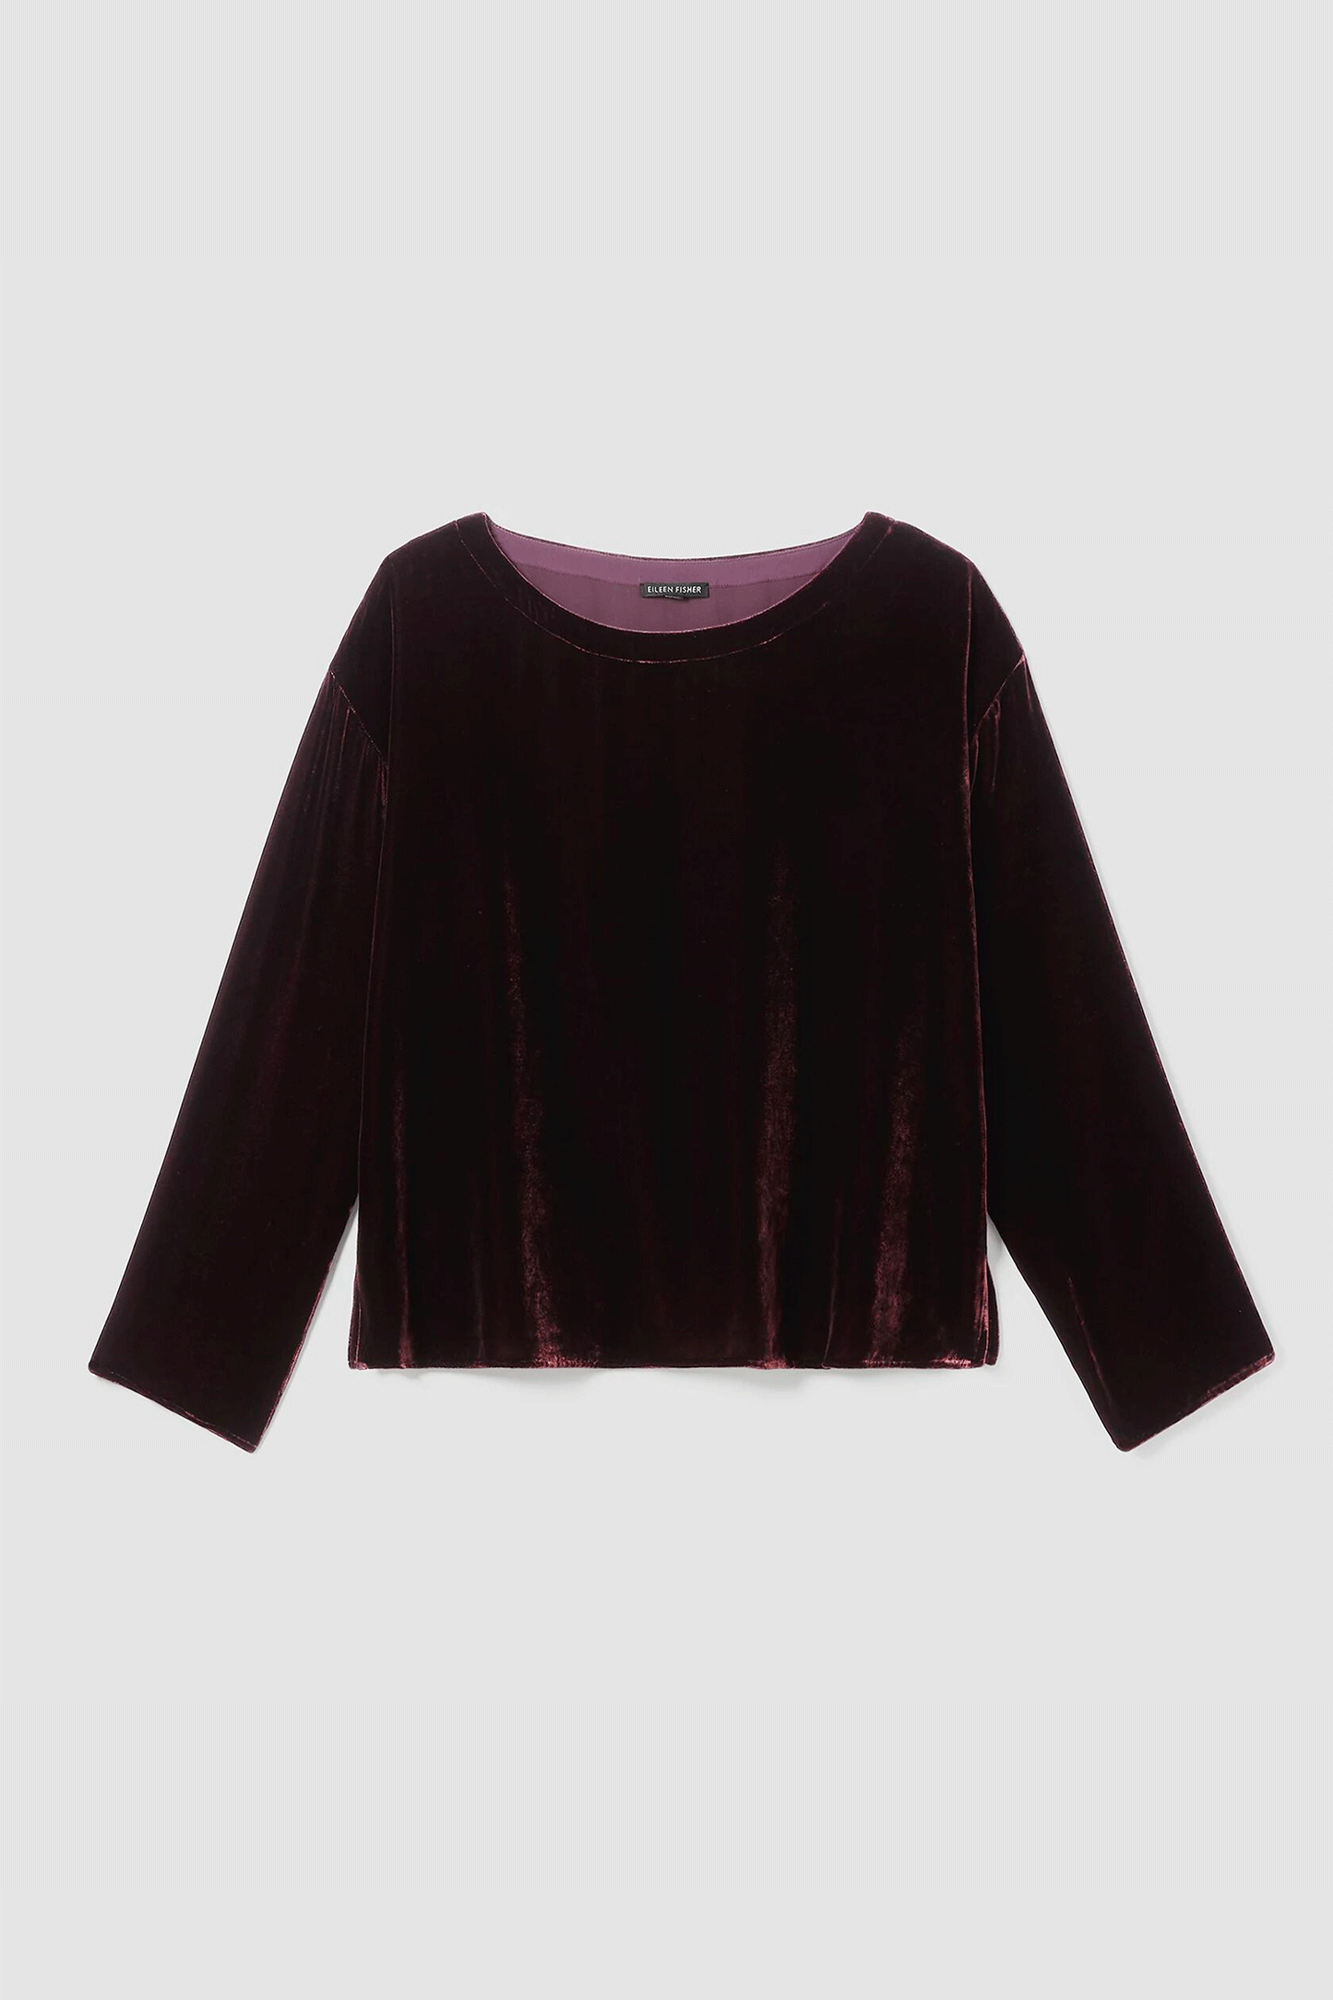 This luxurious Ballet Neck Top from Eileen Fisher is made from a lush blend of shimmering velvet and silk with a soft, drapey fit. Its ballet neck and side slits make it perfect for everyday wear and the washable material makes it incredibly easy to care for.